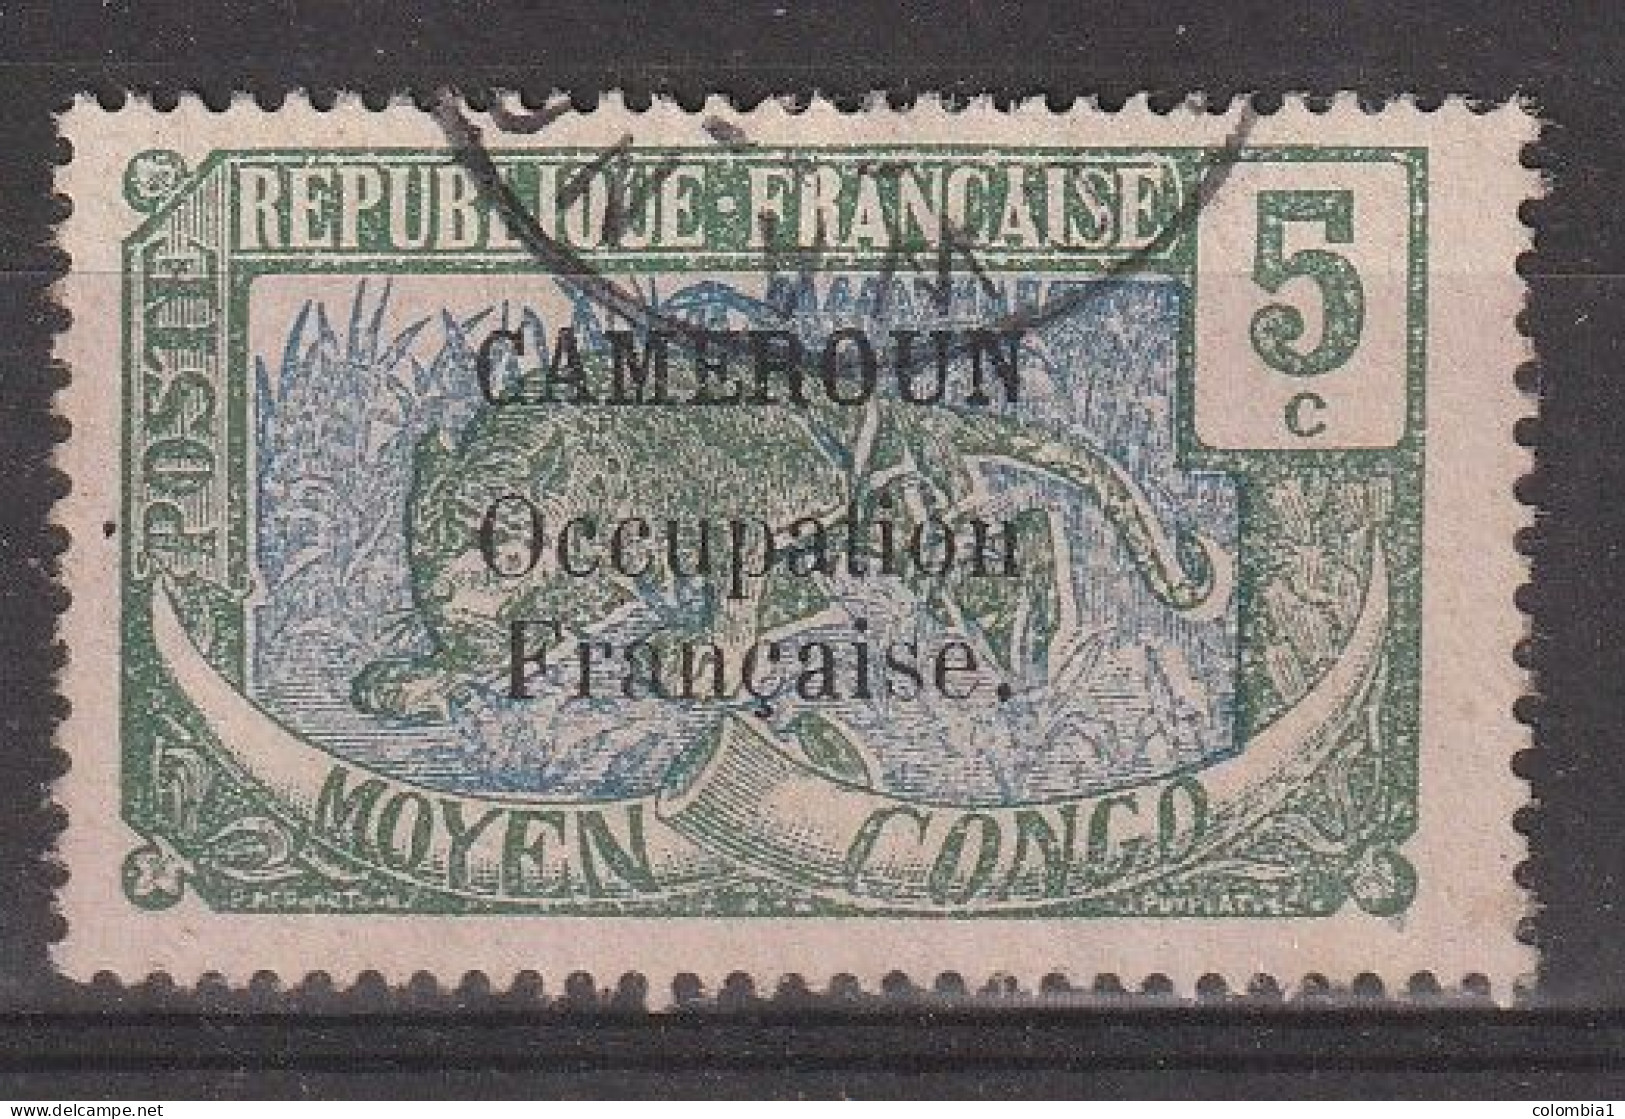 CAMEROUN YT 70 Oblitéré EBOLOWA NG - Used Stamps